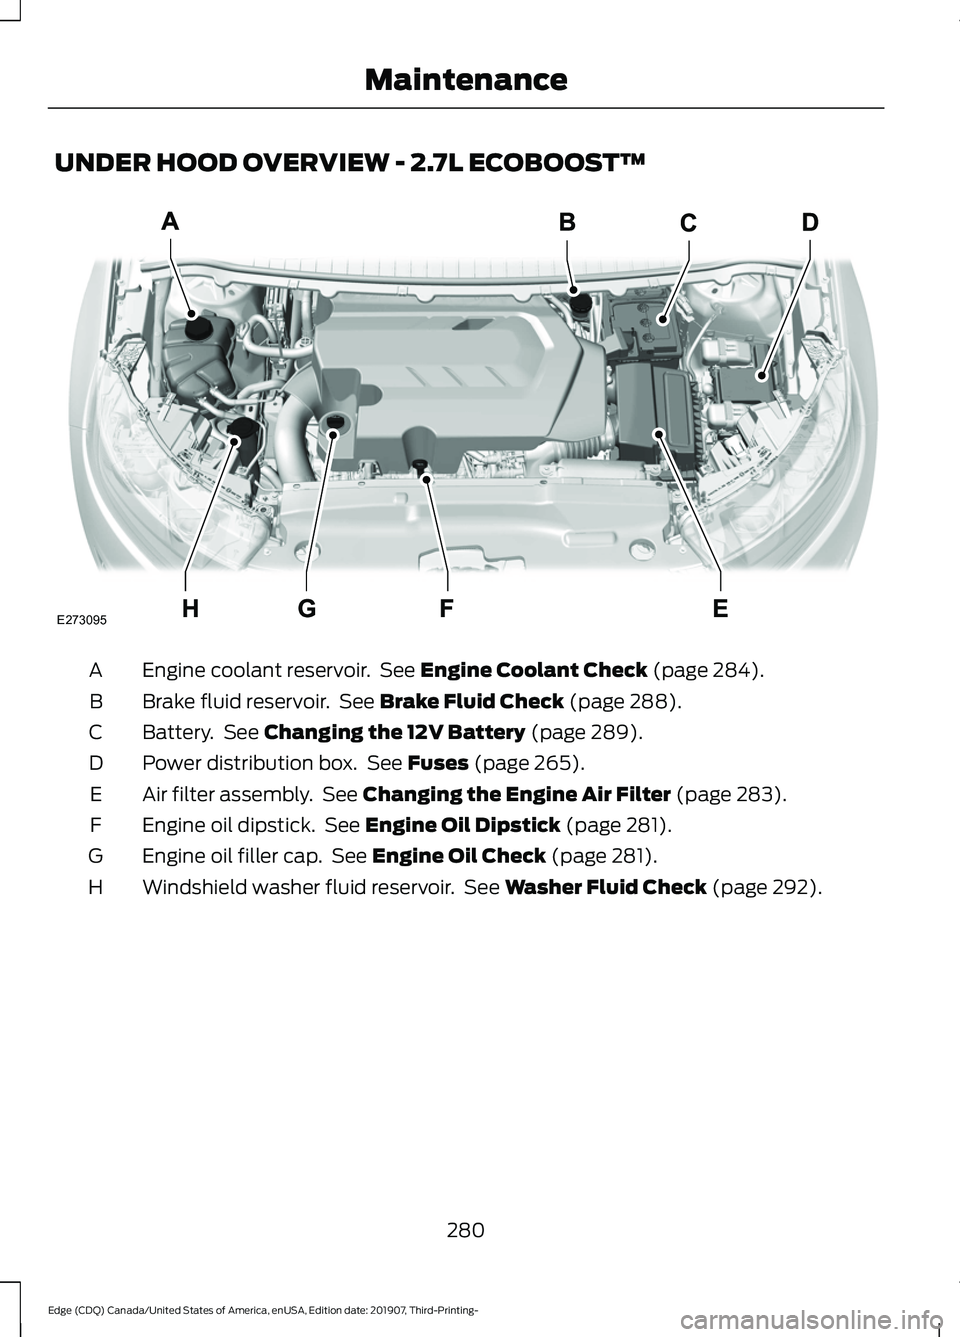 FORD EDGE 2020  Owners Manual UNDER HOOD OVERVIEW - 2.7L ECOBOOST™
Engine coolant reservoir.  See Engine Coolant Check (page 284).
A
Brake fluid reservoir.  See 
Brake Fluid Check (page 288).
B
Battery.  See 
Changing the 12V Ba